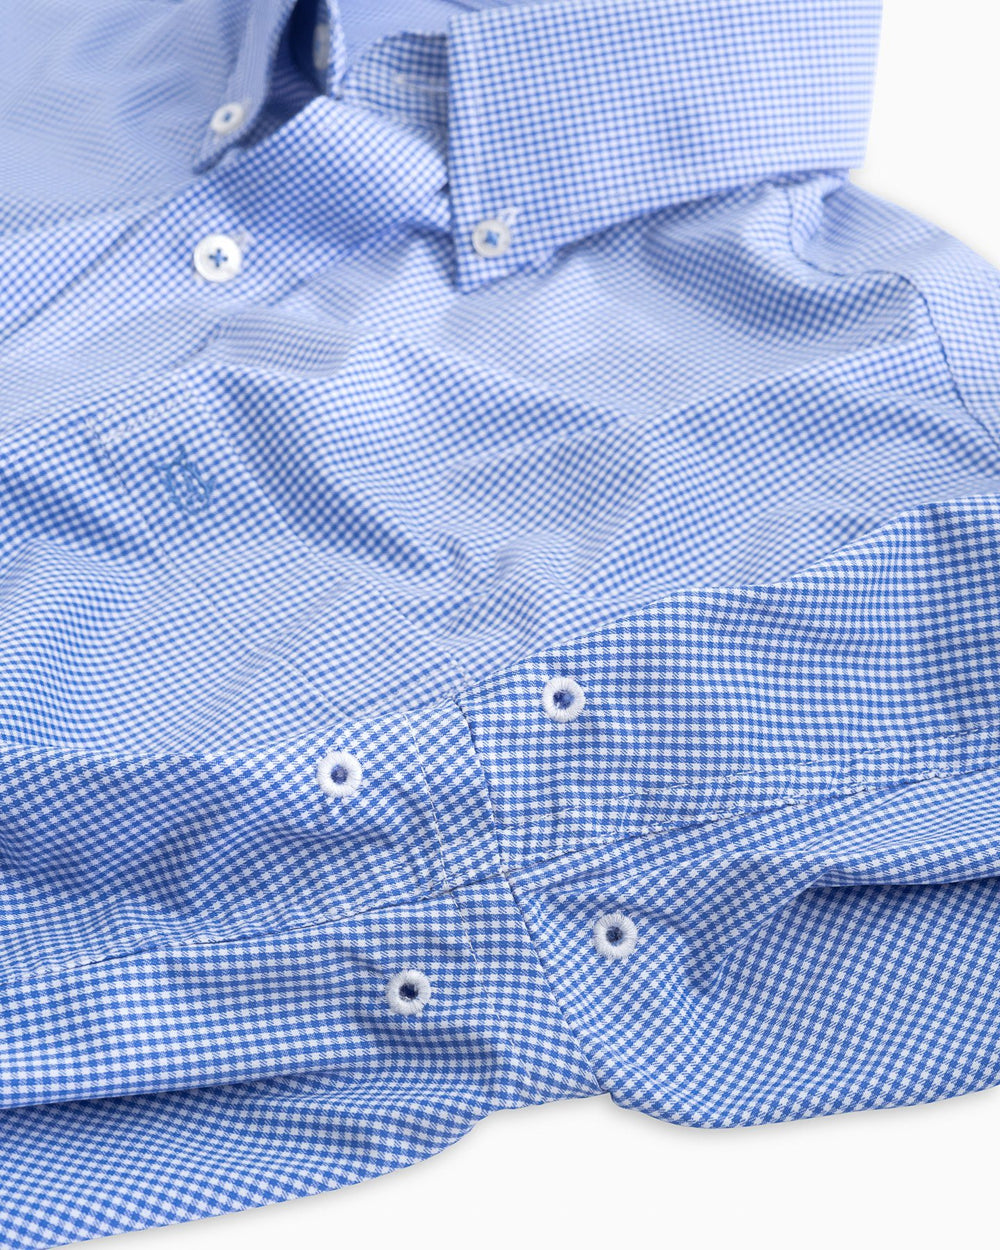 Arm vents of the Men's Navy Micro Gingham Intercoastal Performance Sport Shirt by Southern Tide - blue cove